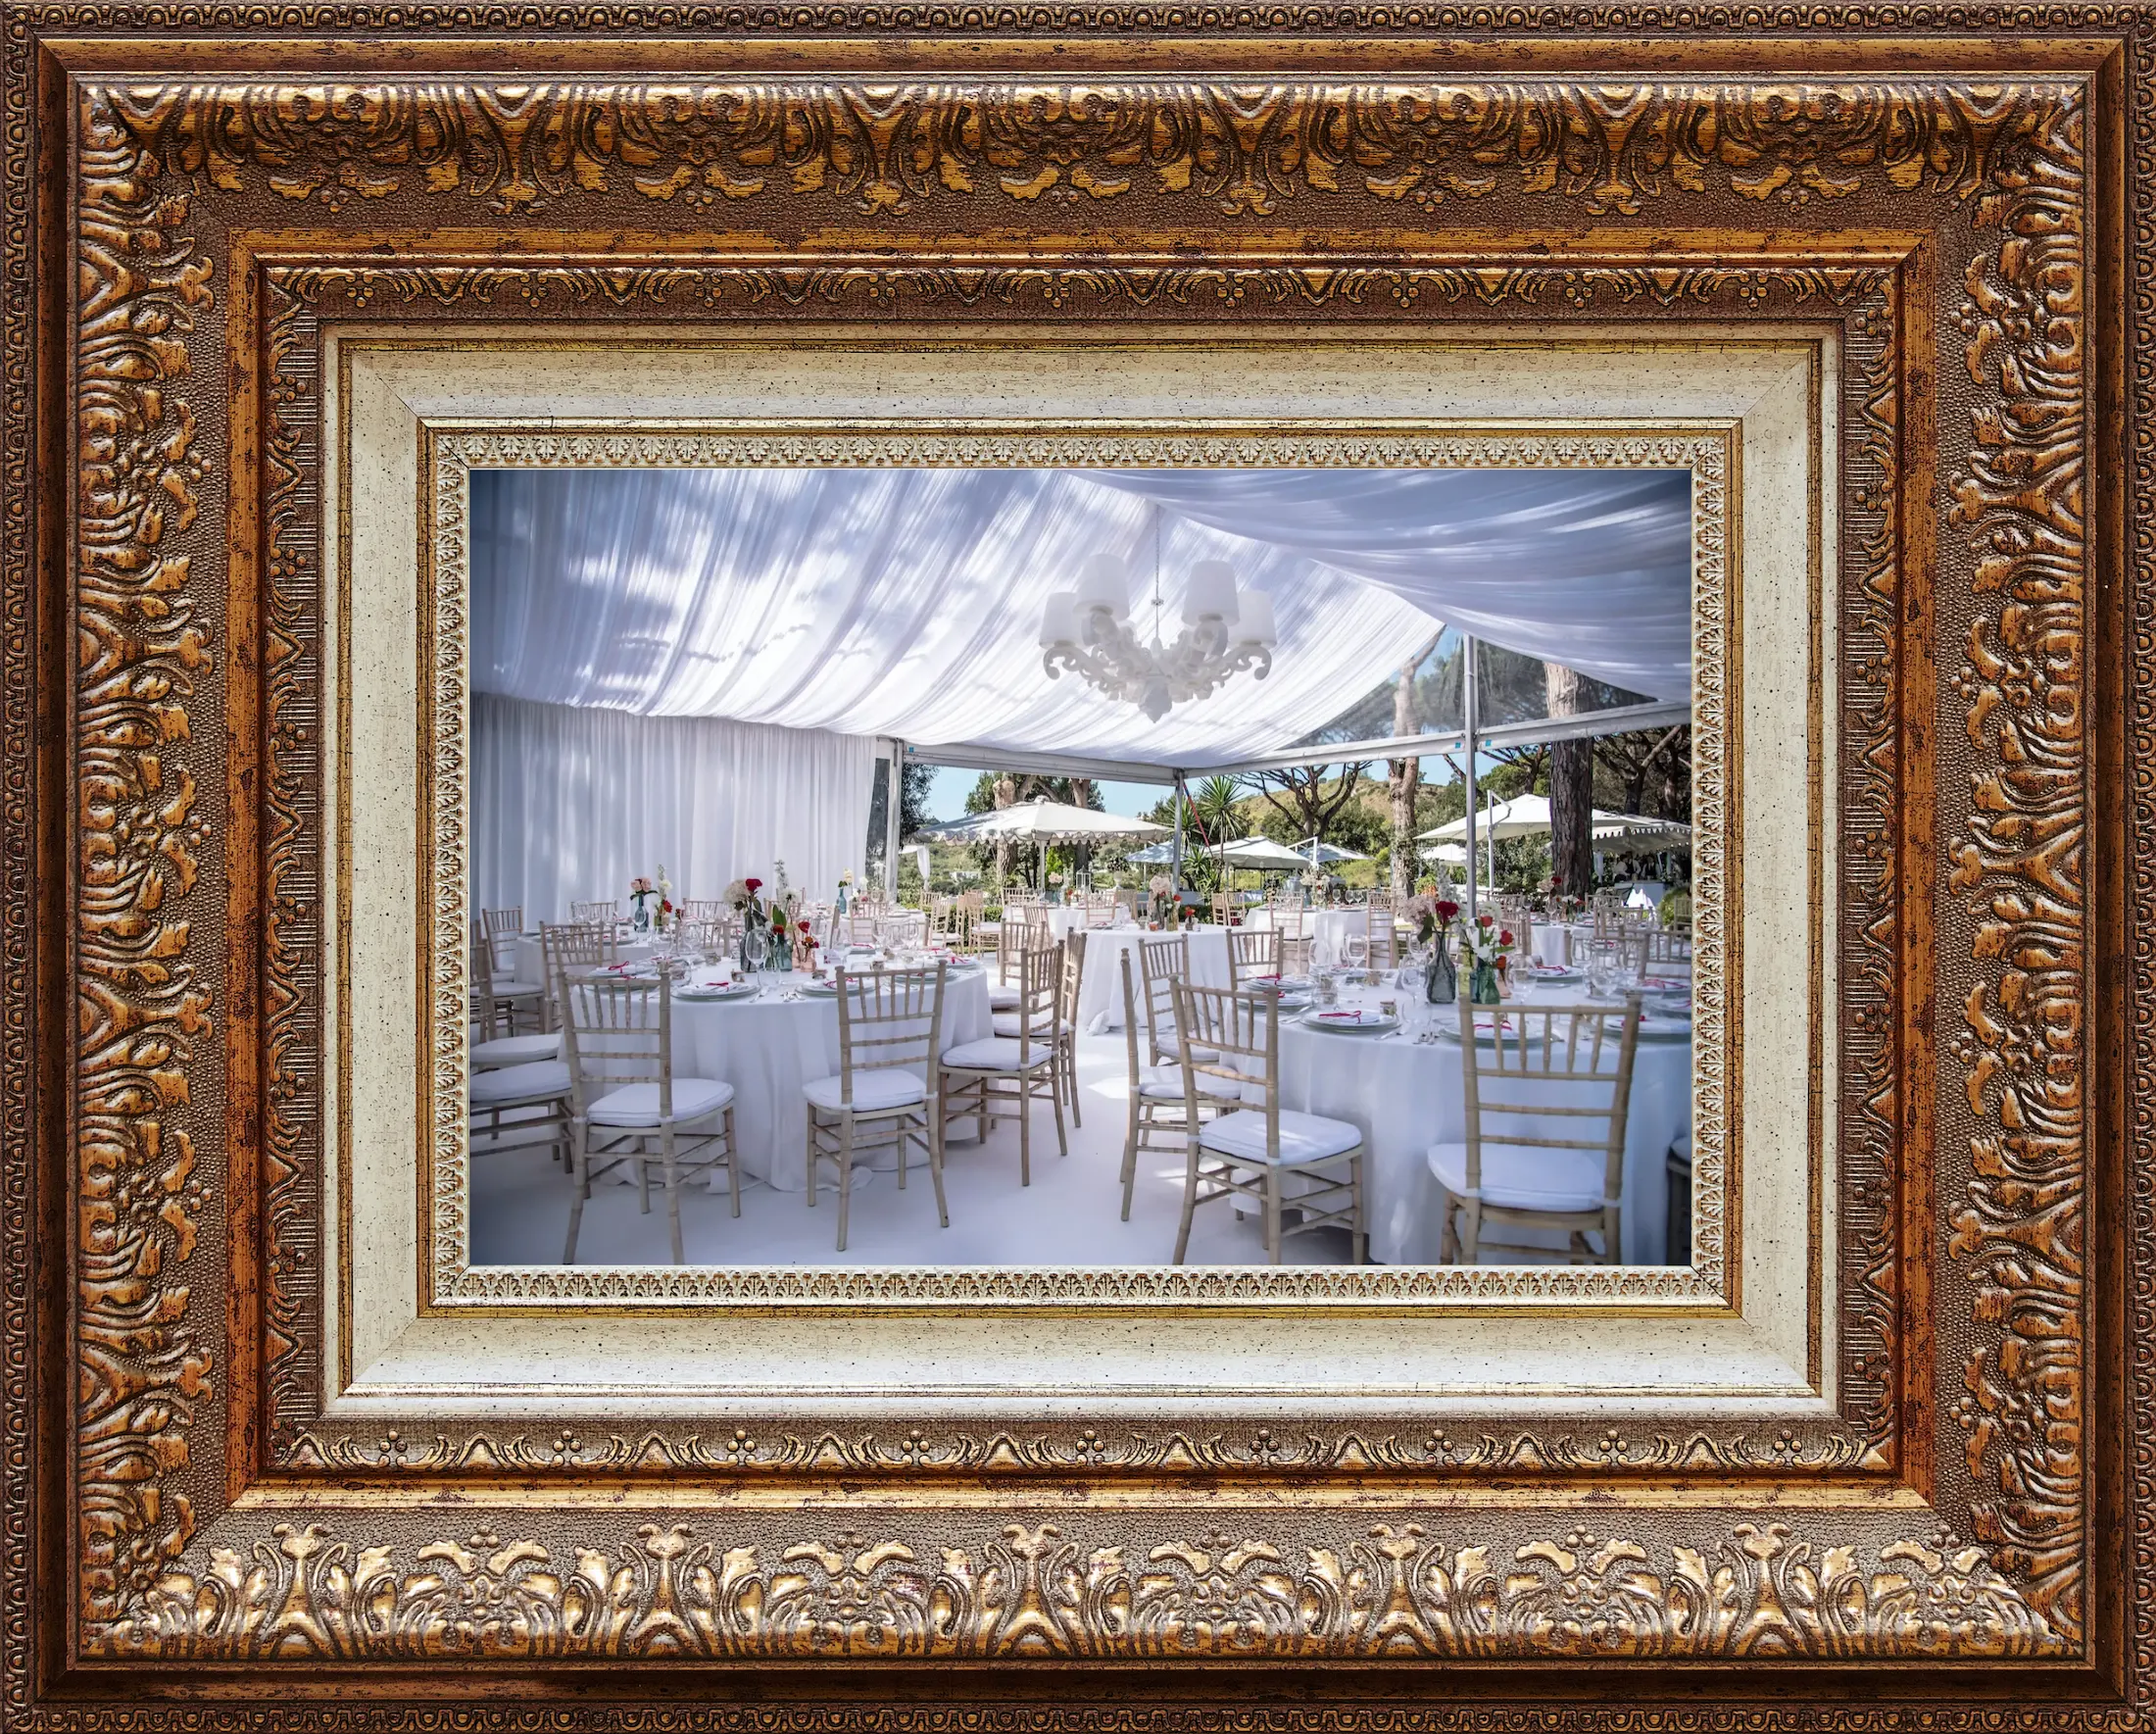 Image of a all white lined and decorated marquee